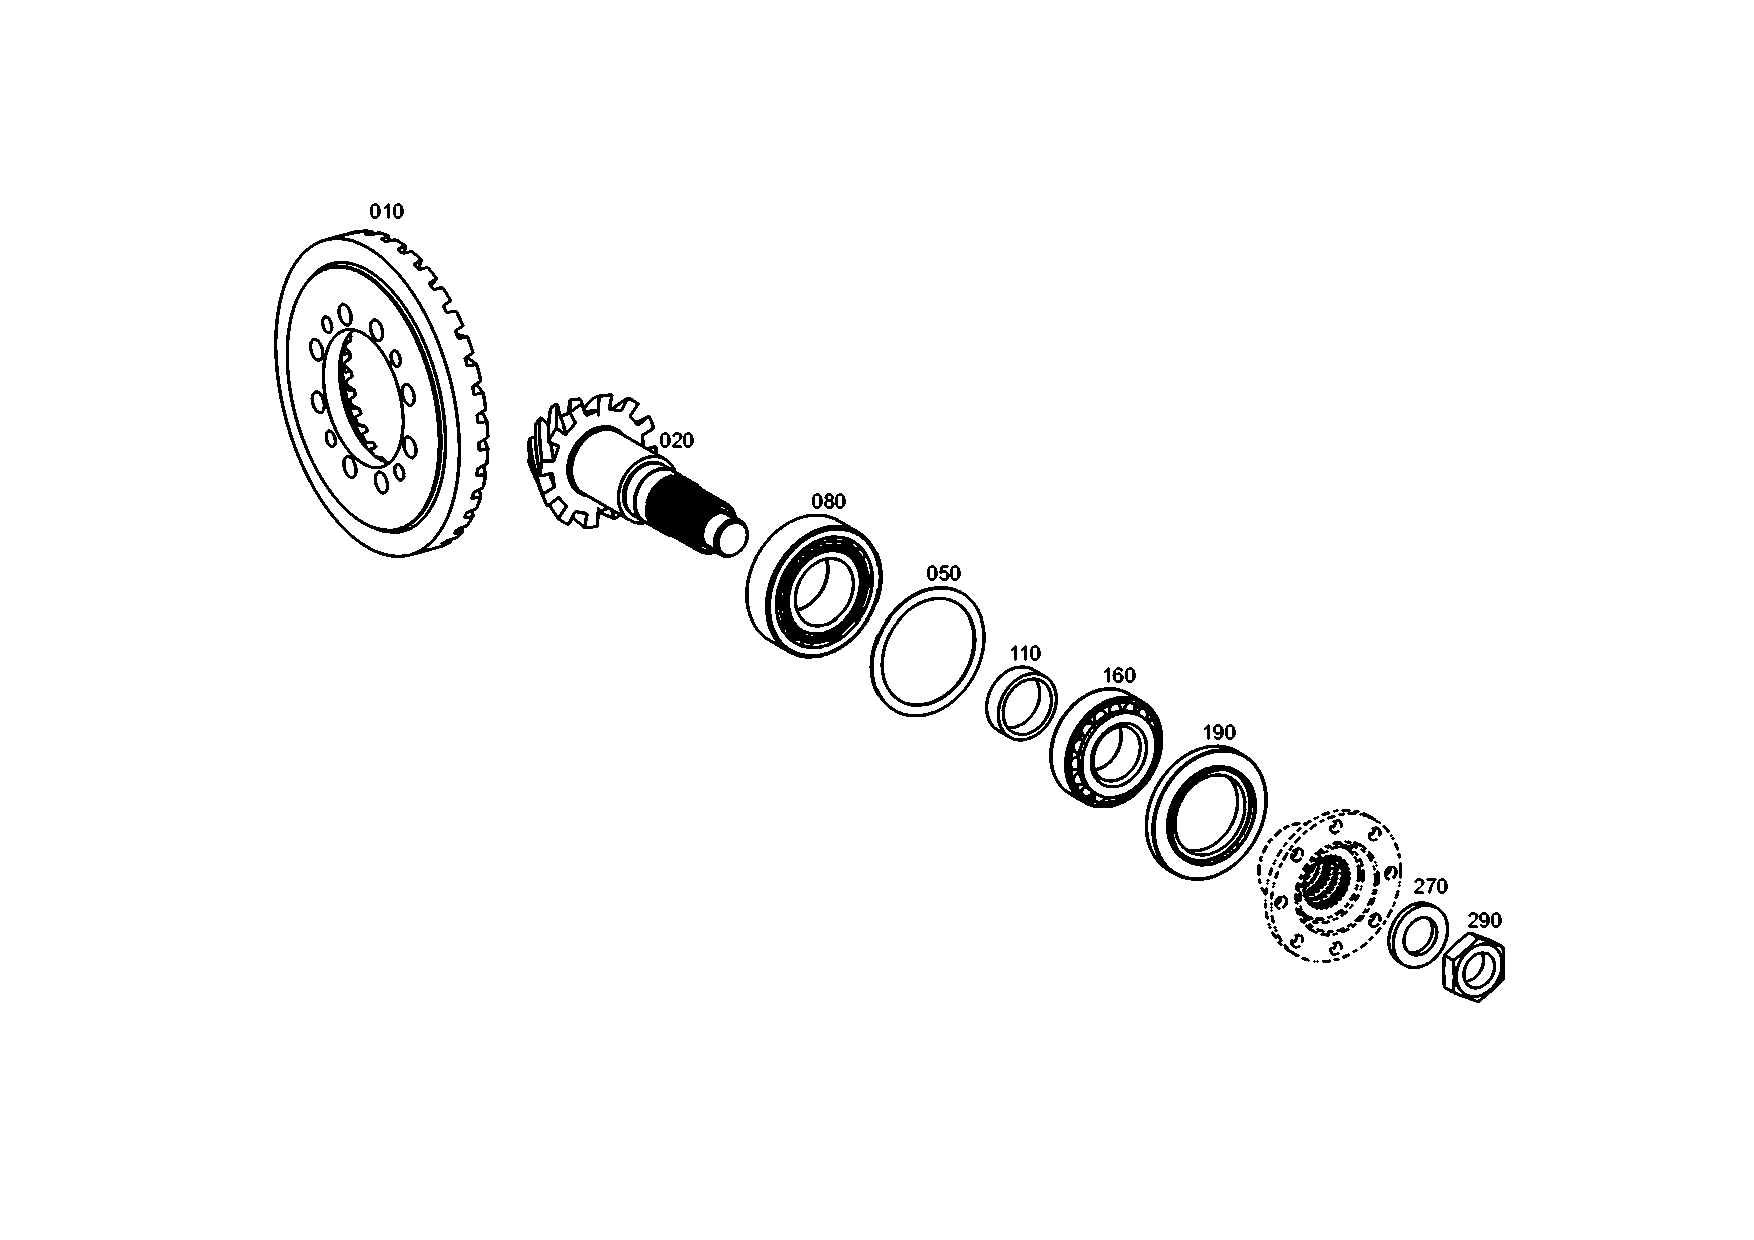 drawing for CATERPILLAR INC. 7029703 - RING (figure 3)